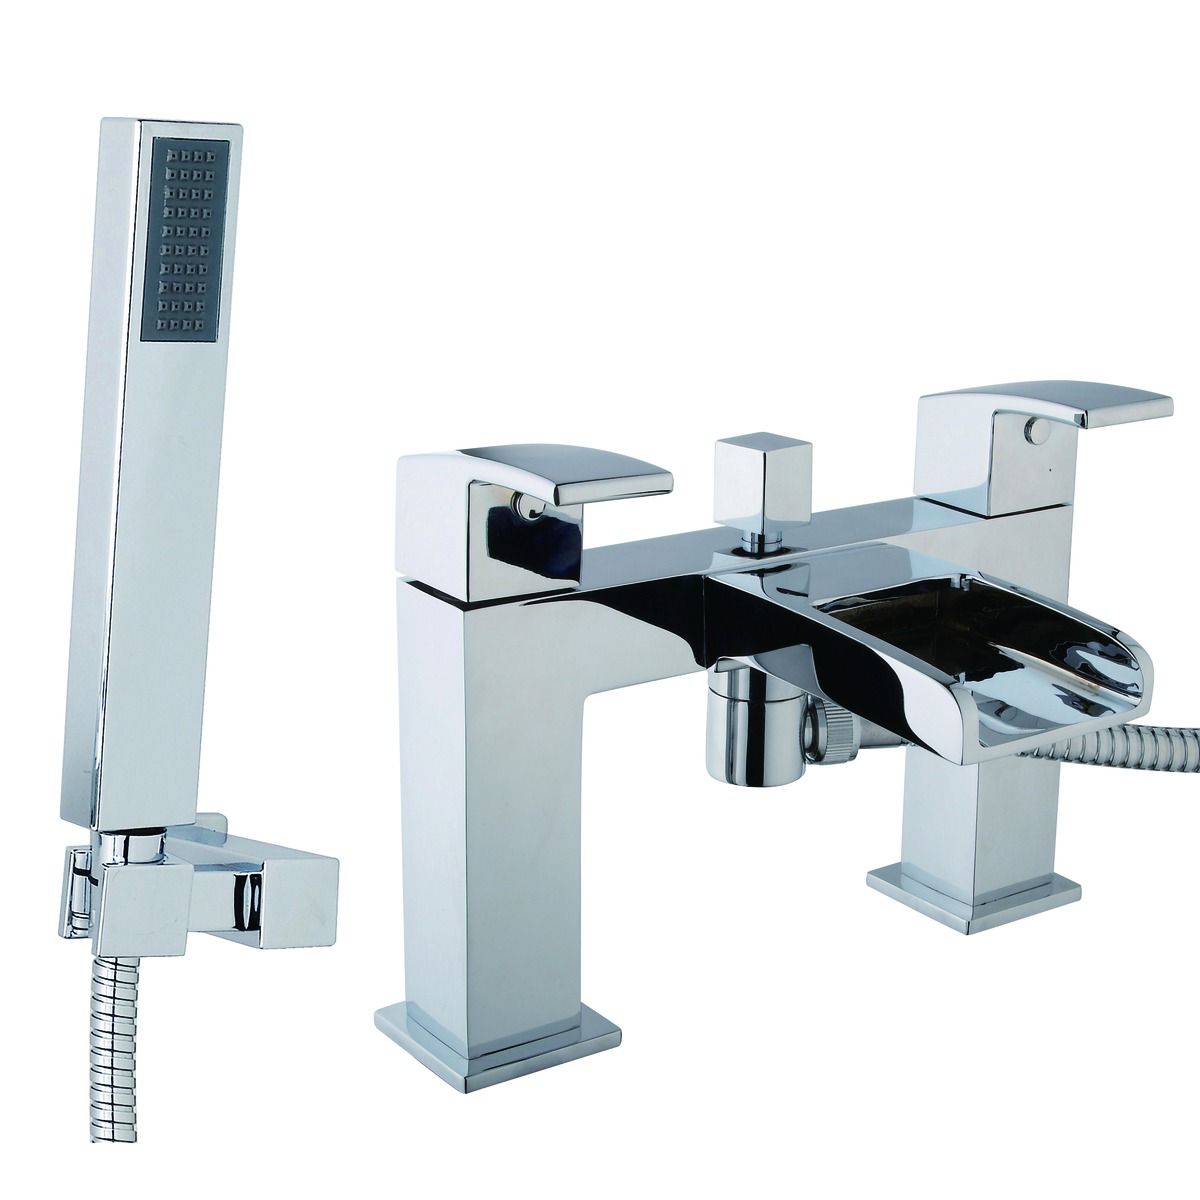 Image of Wickes Waterfall Bath Shower Mixer Tap - Chrome